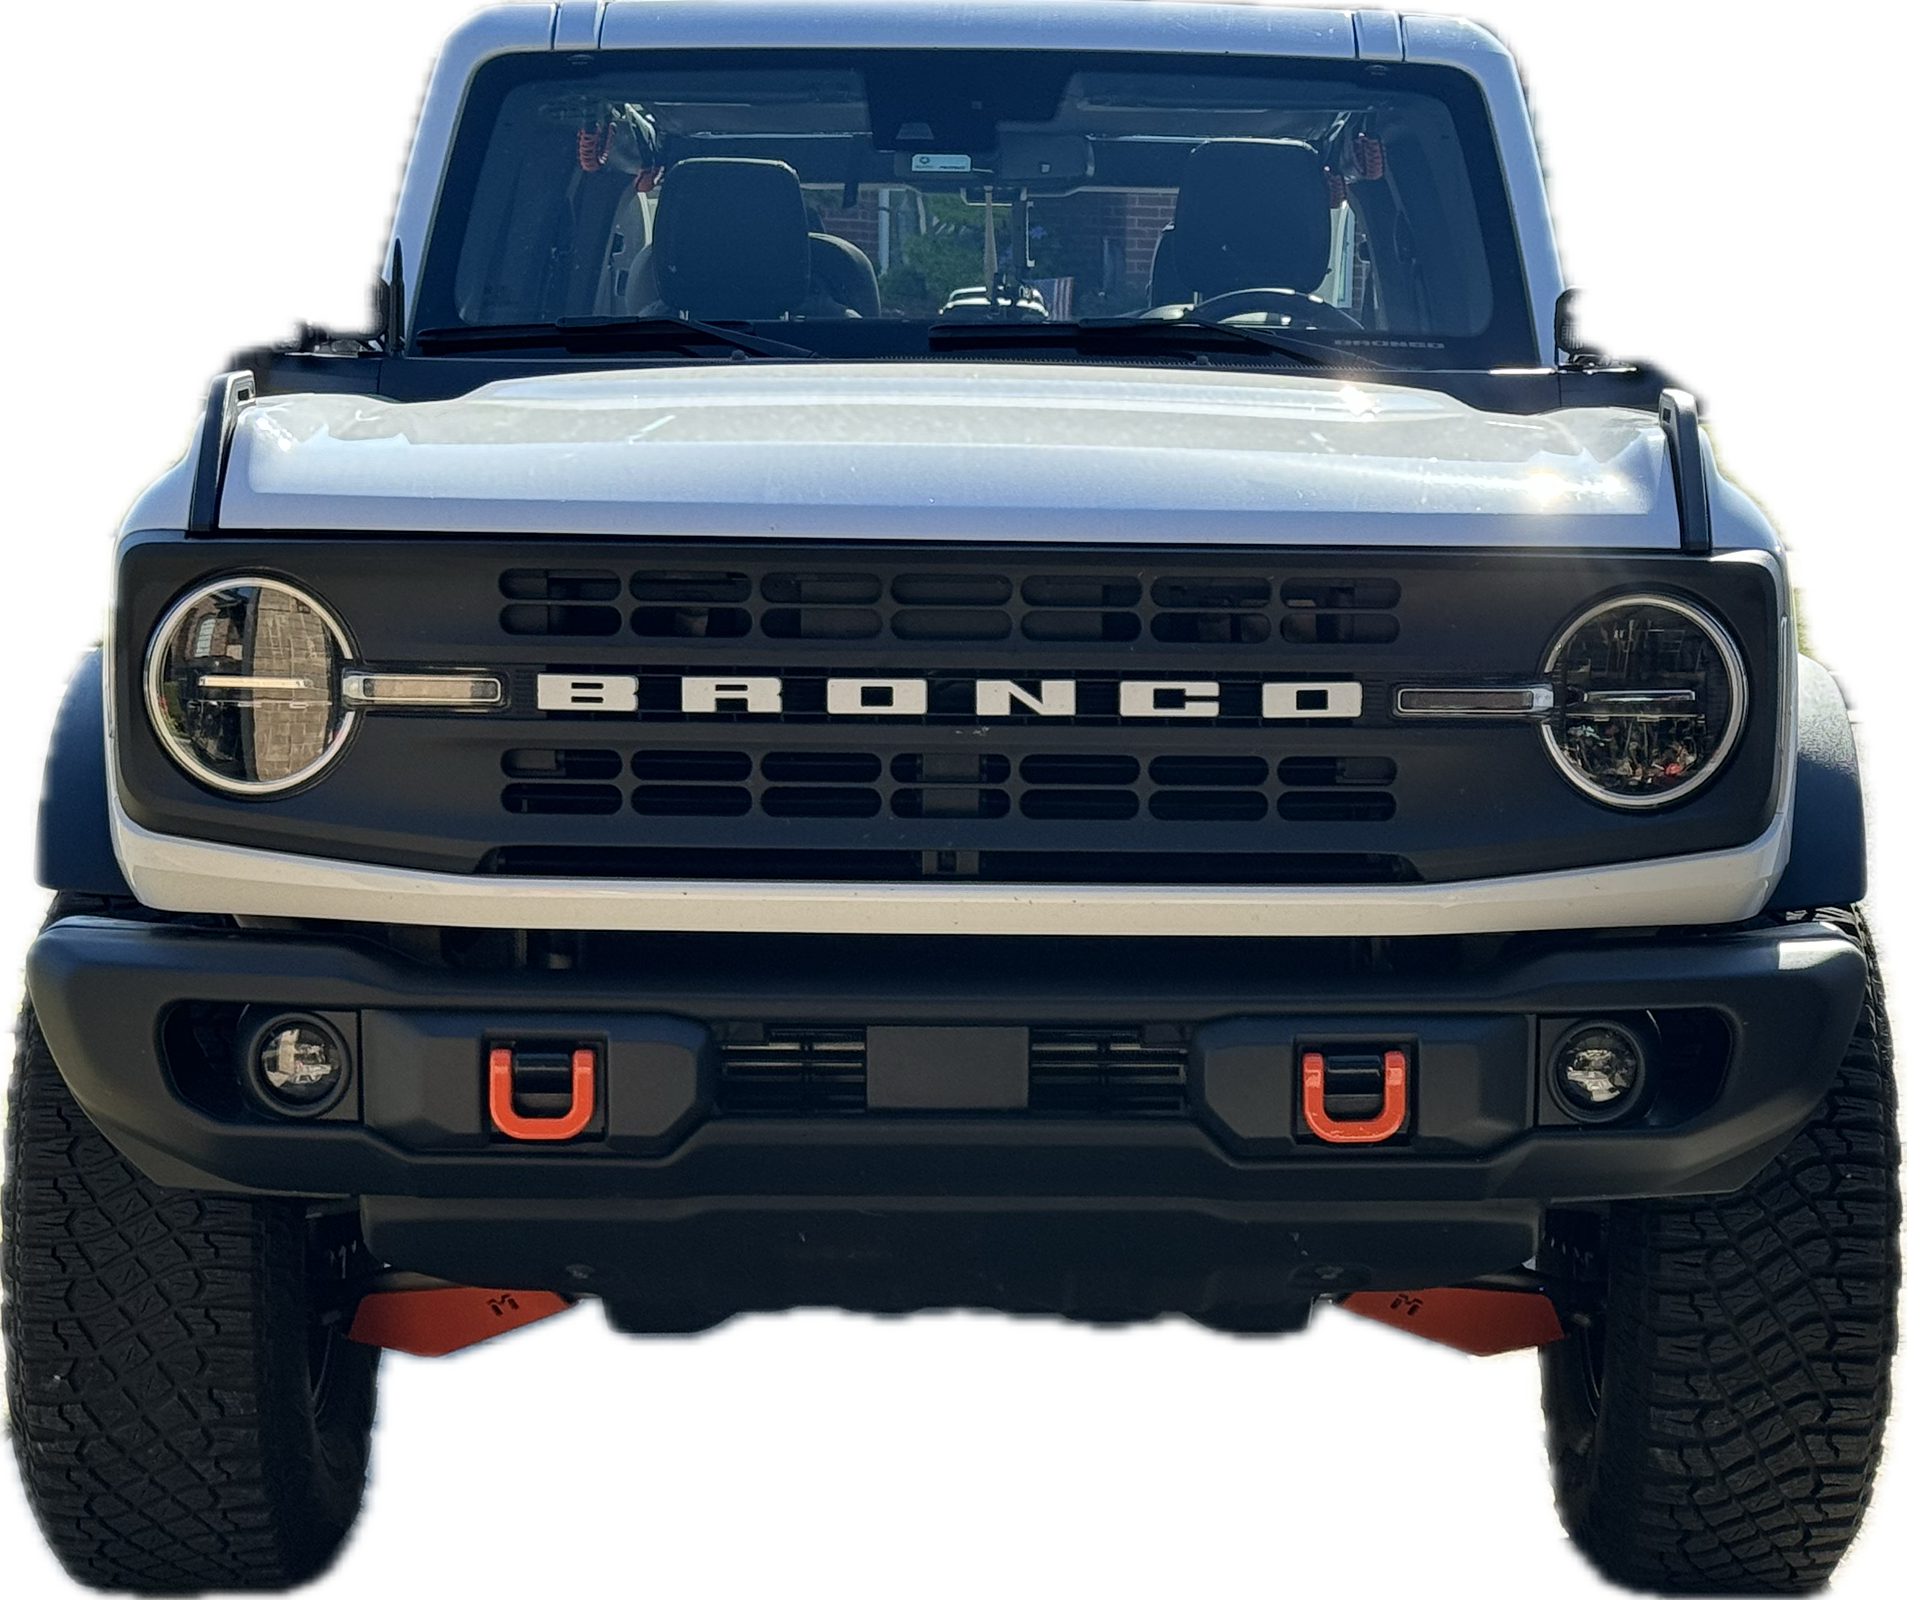 Ford Bronco BulletTheBronco is ready for Moab... tips? 1713366524552-ys